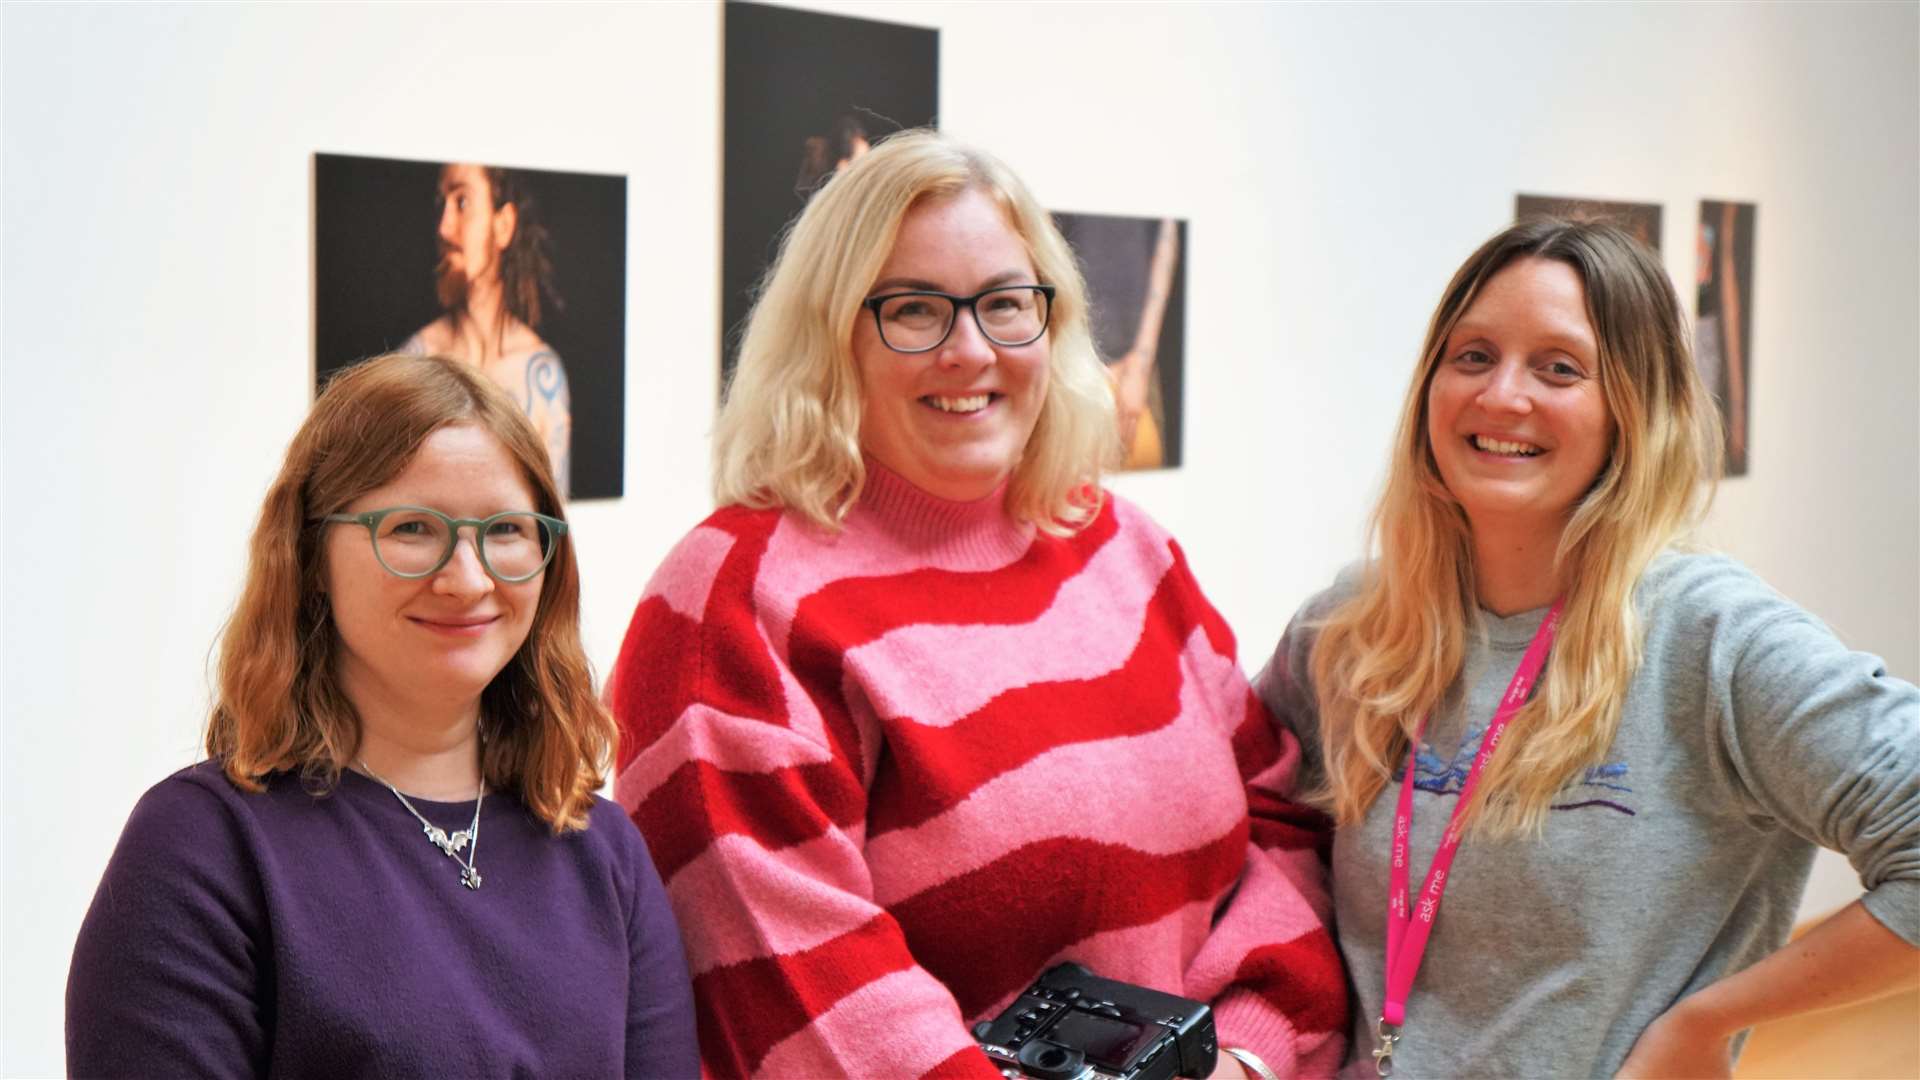 Aimee Lockwood, Susie Mackenzie and Charlotte Mountford at the opening of Painted People on Saturday. Picture: DGS